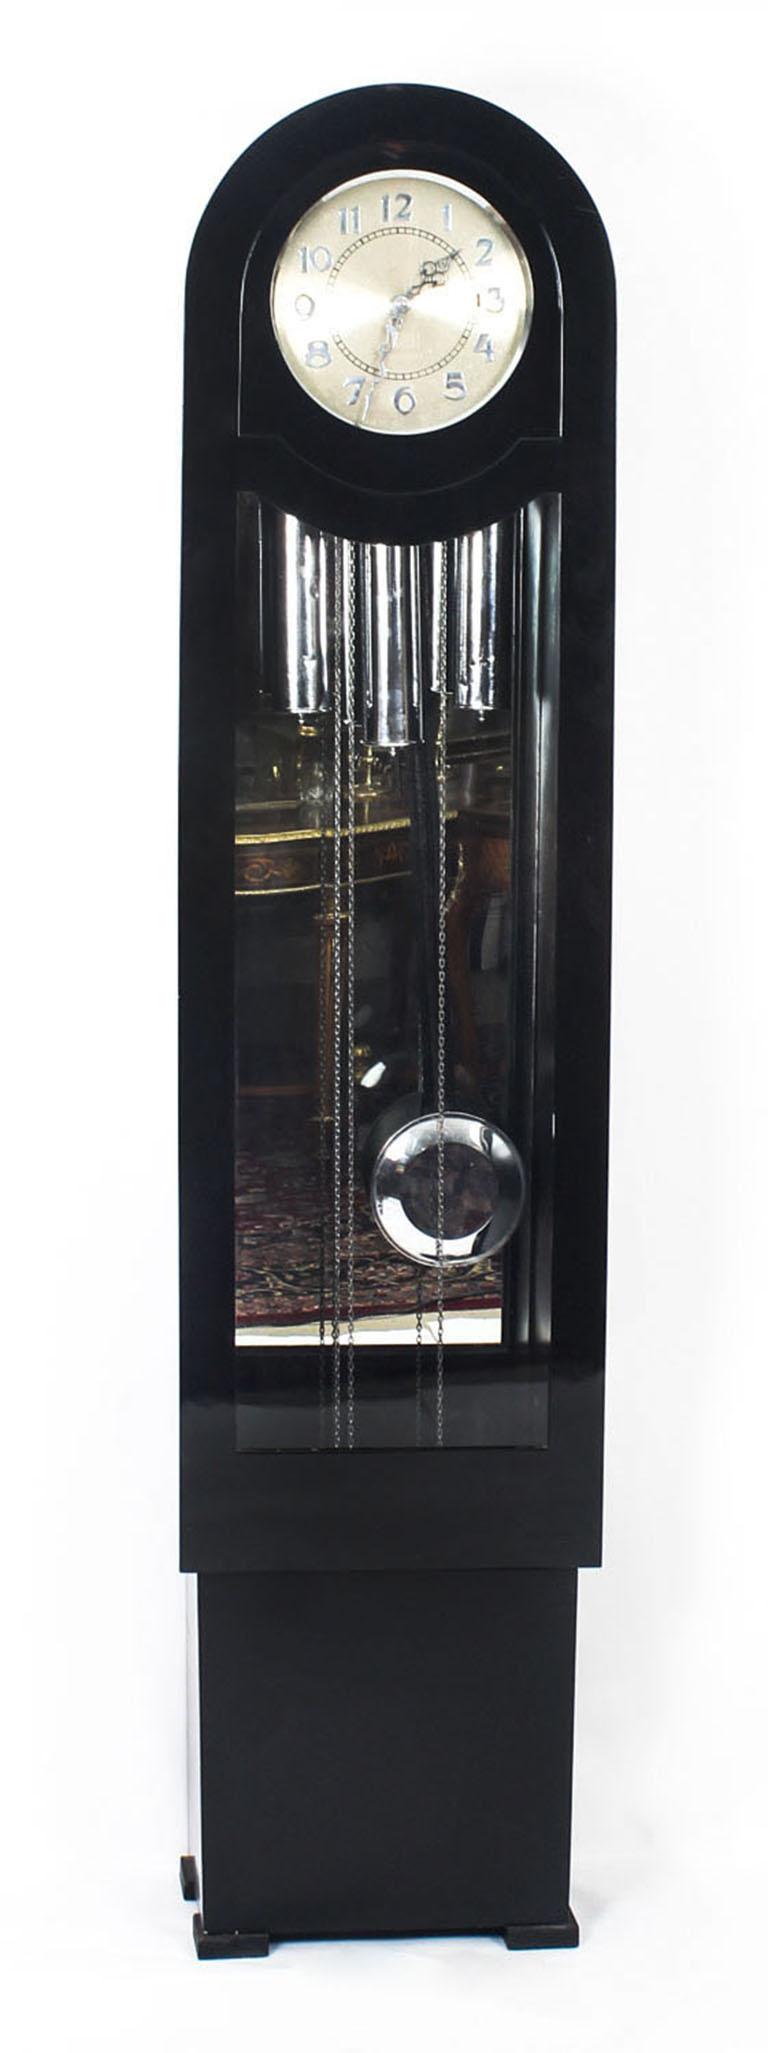 An elegant English Art Deco black lacquer Westminster chiming longcase clock made in London, circa 1935 in date.

The clock features a hinged glazed door on a boxed frame and a burnished silvered dial with chrome numerals.

It has three